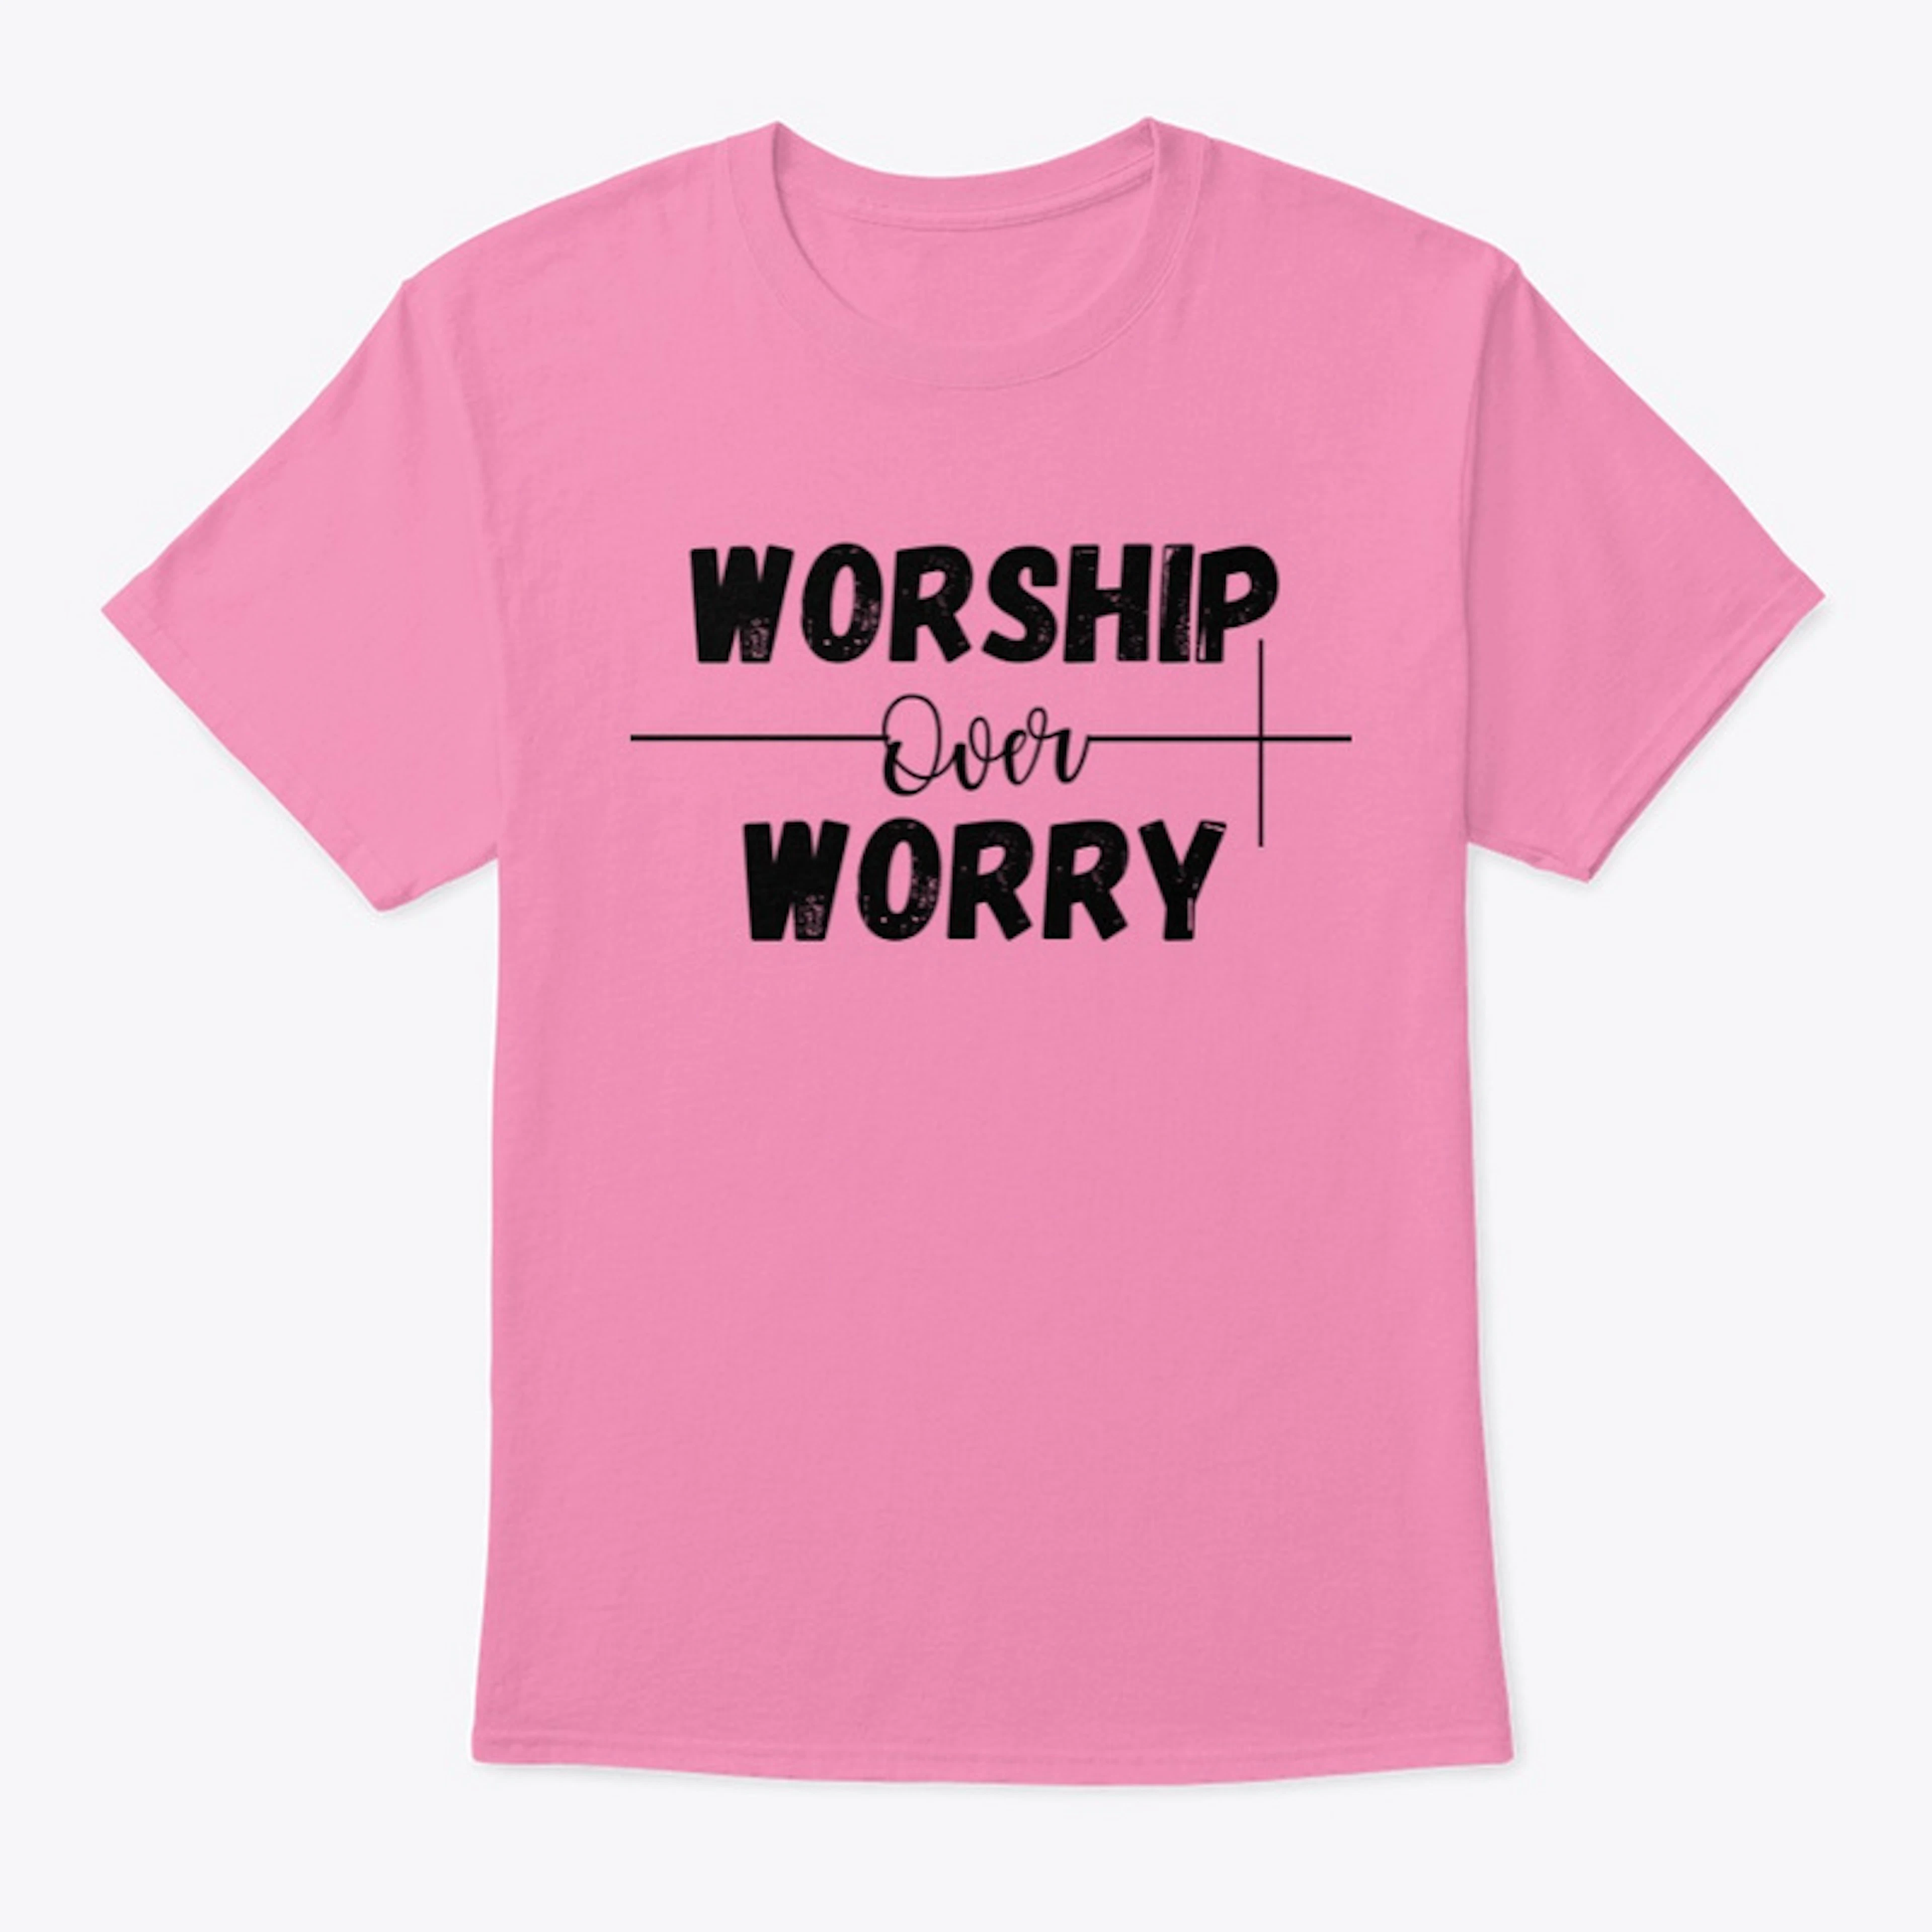 Worship Over Worry